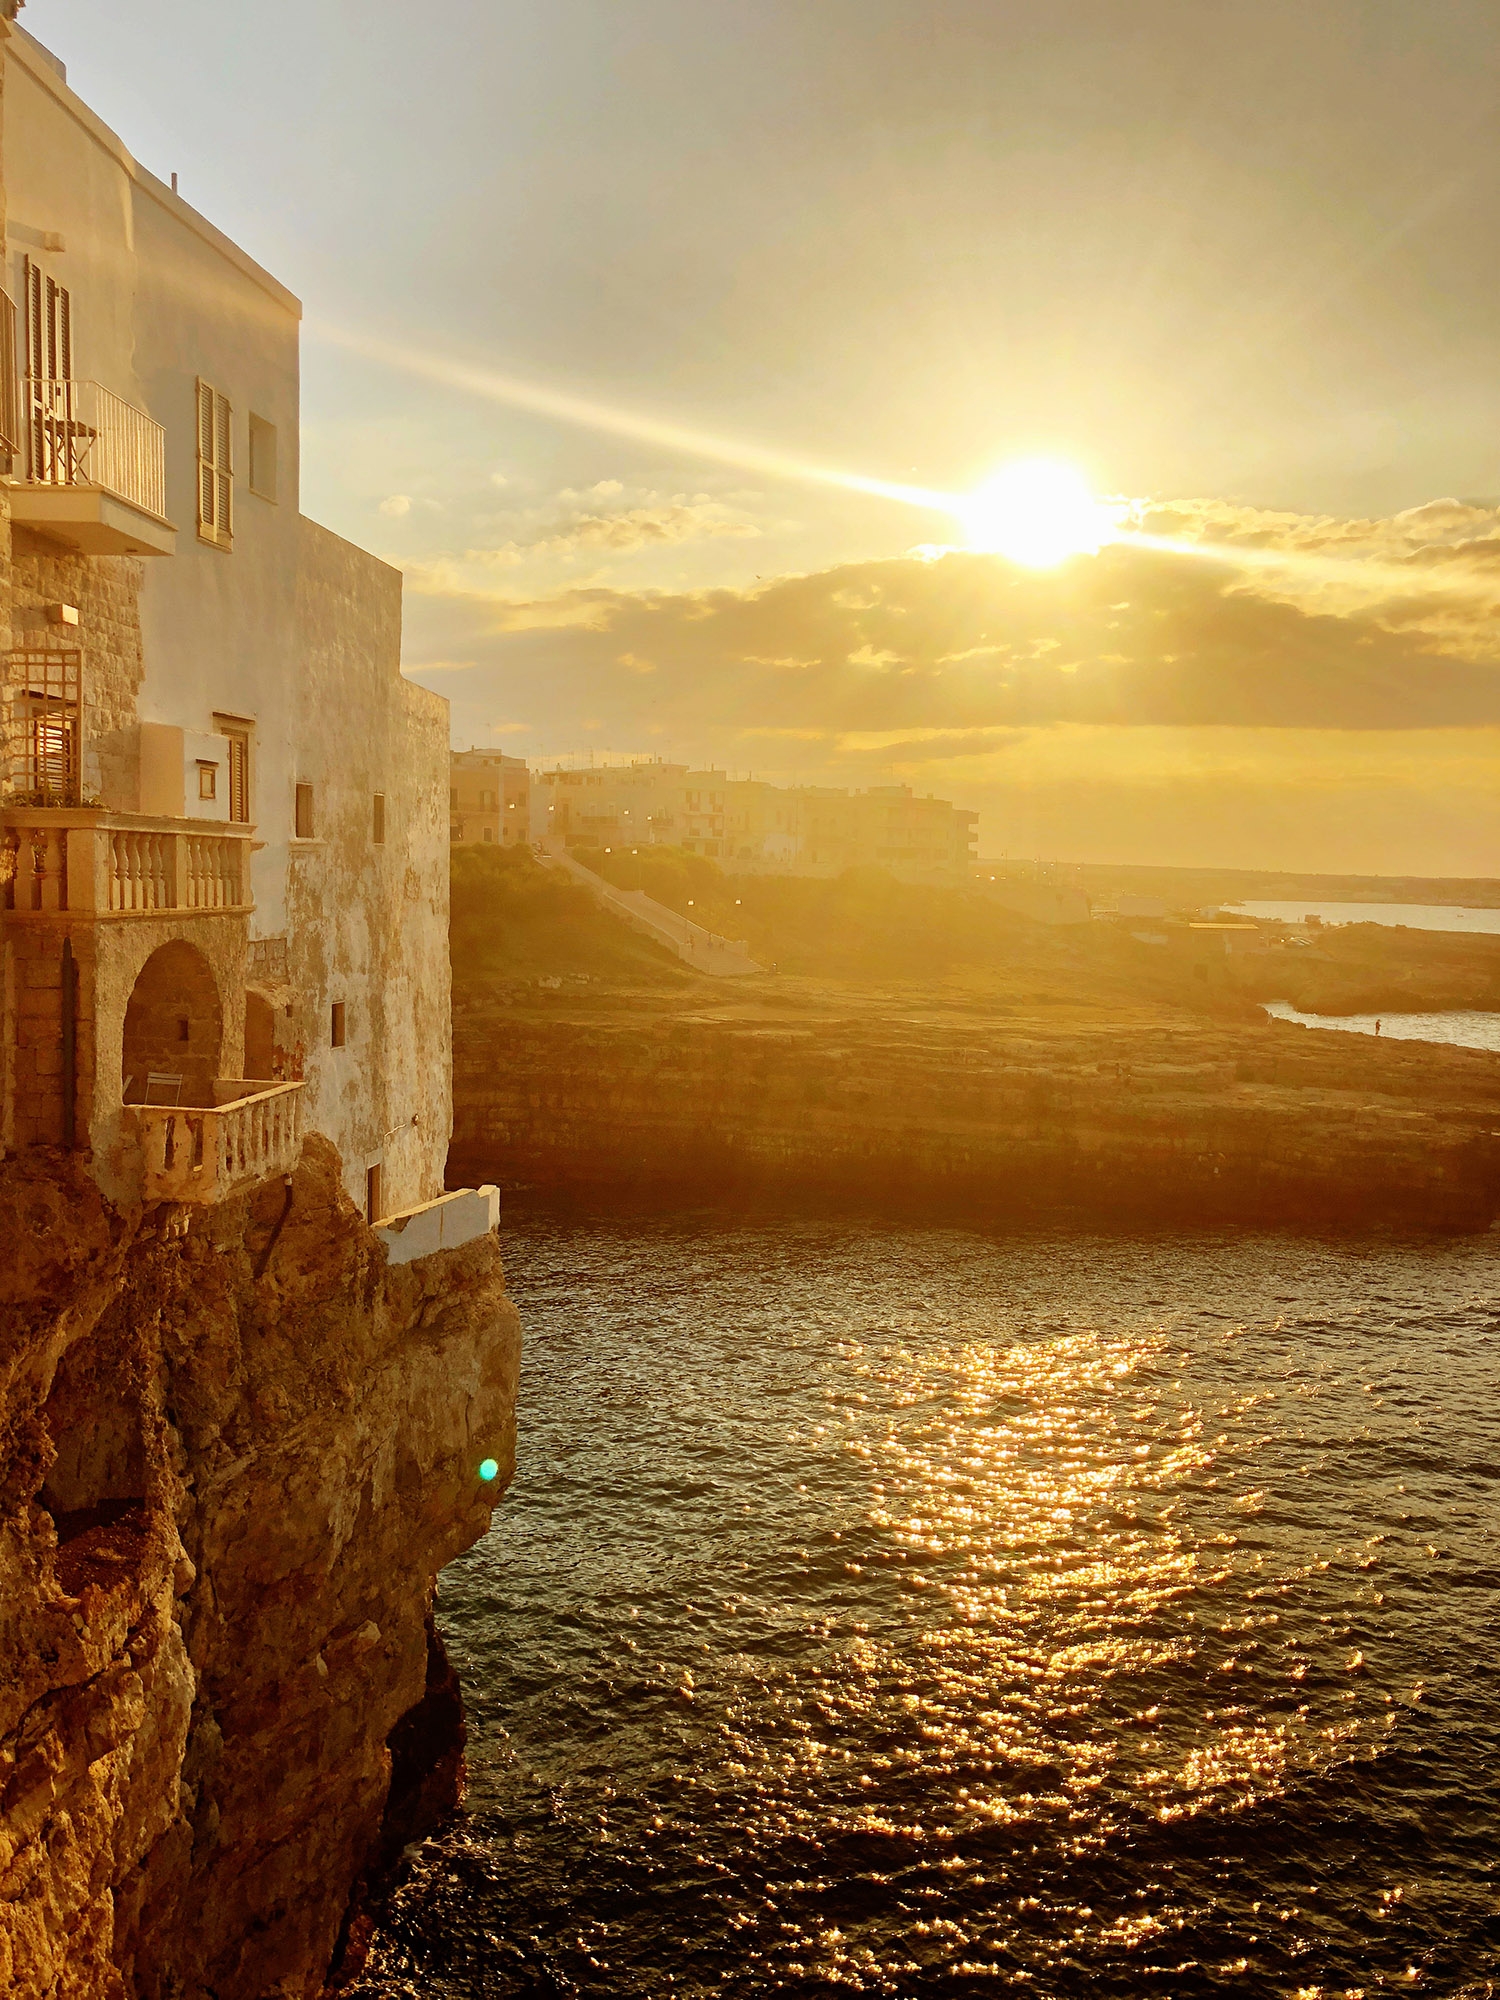 A view of the sunset on the ocean from a cliff at Polignano de Mare